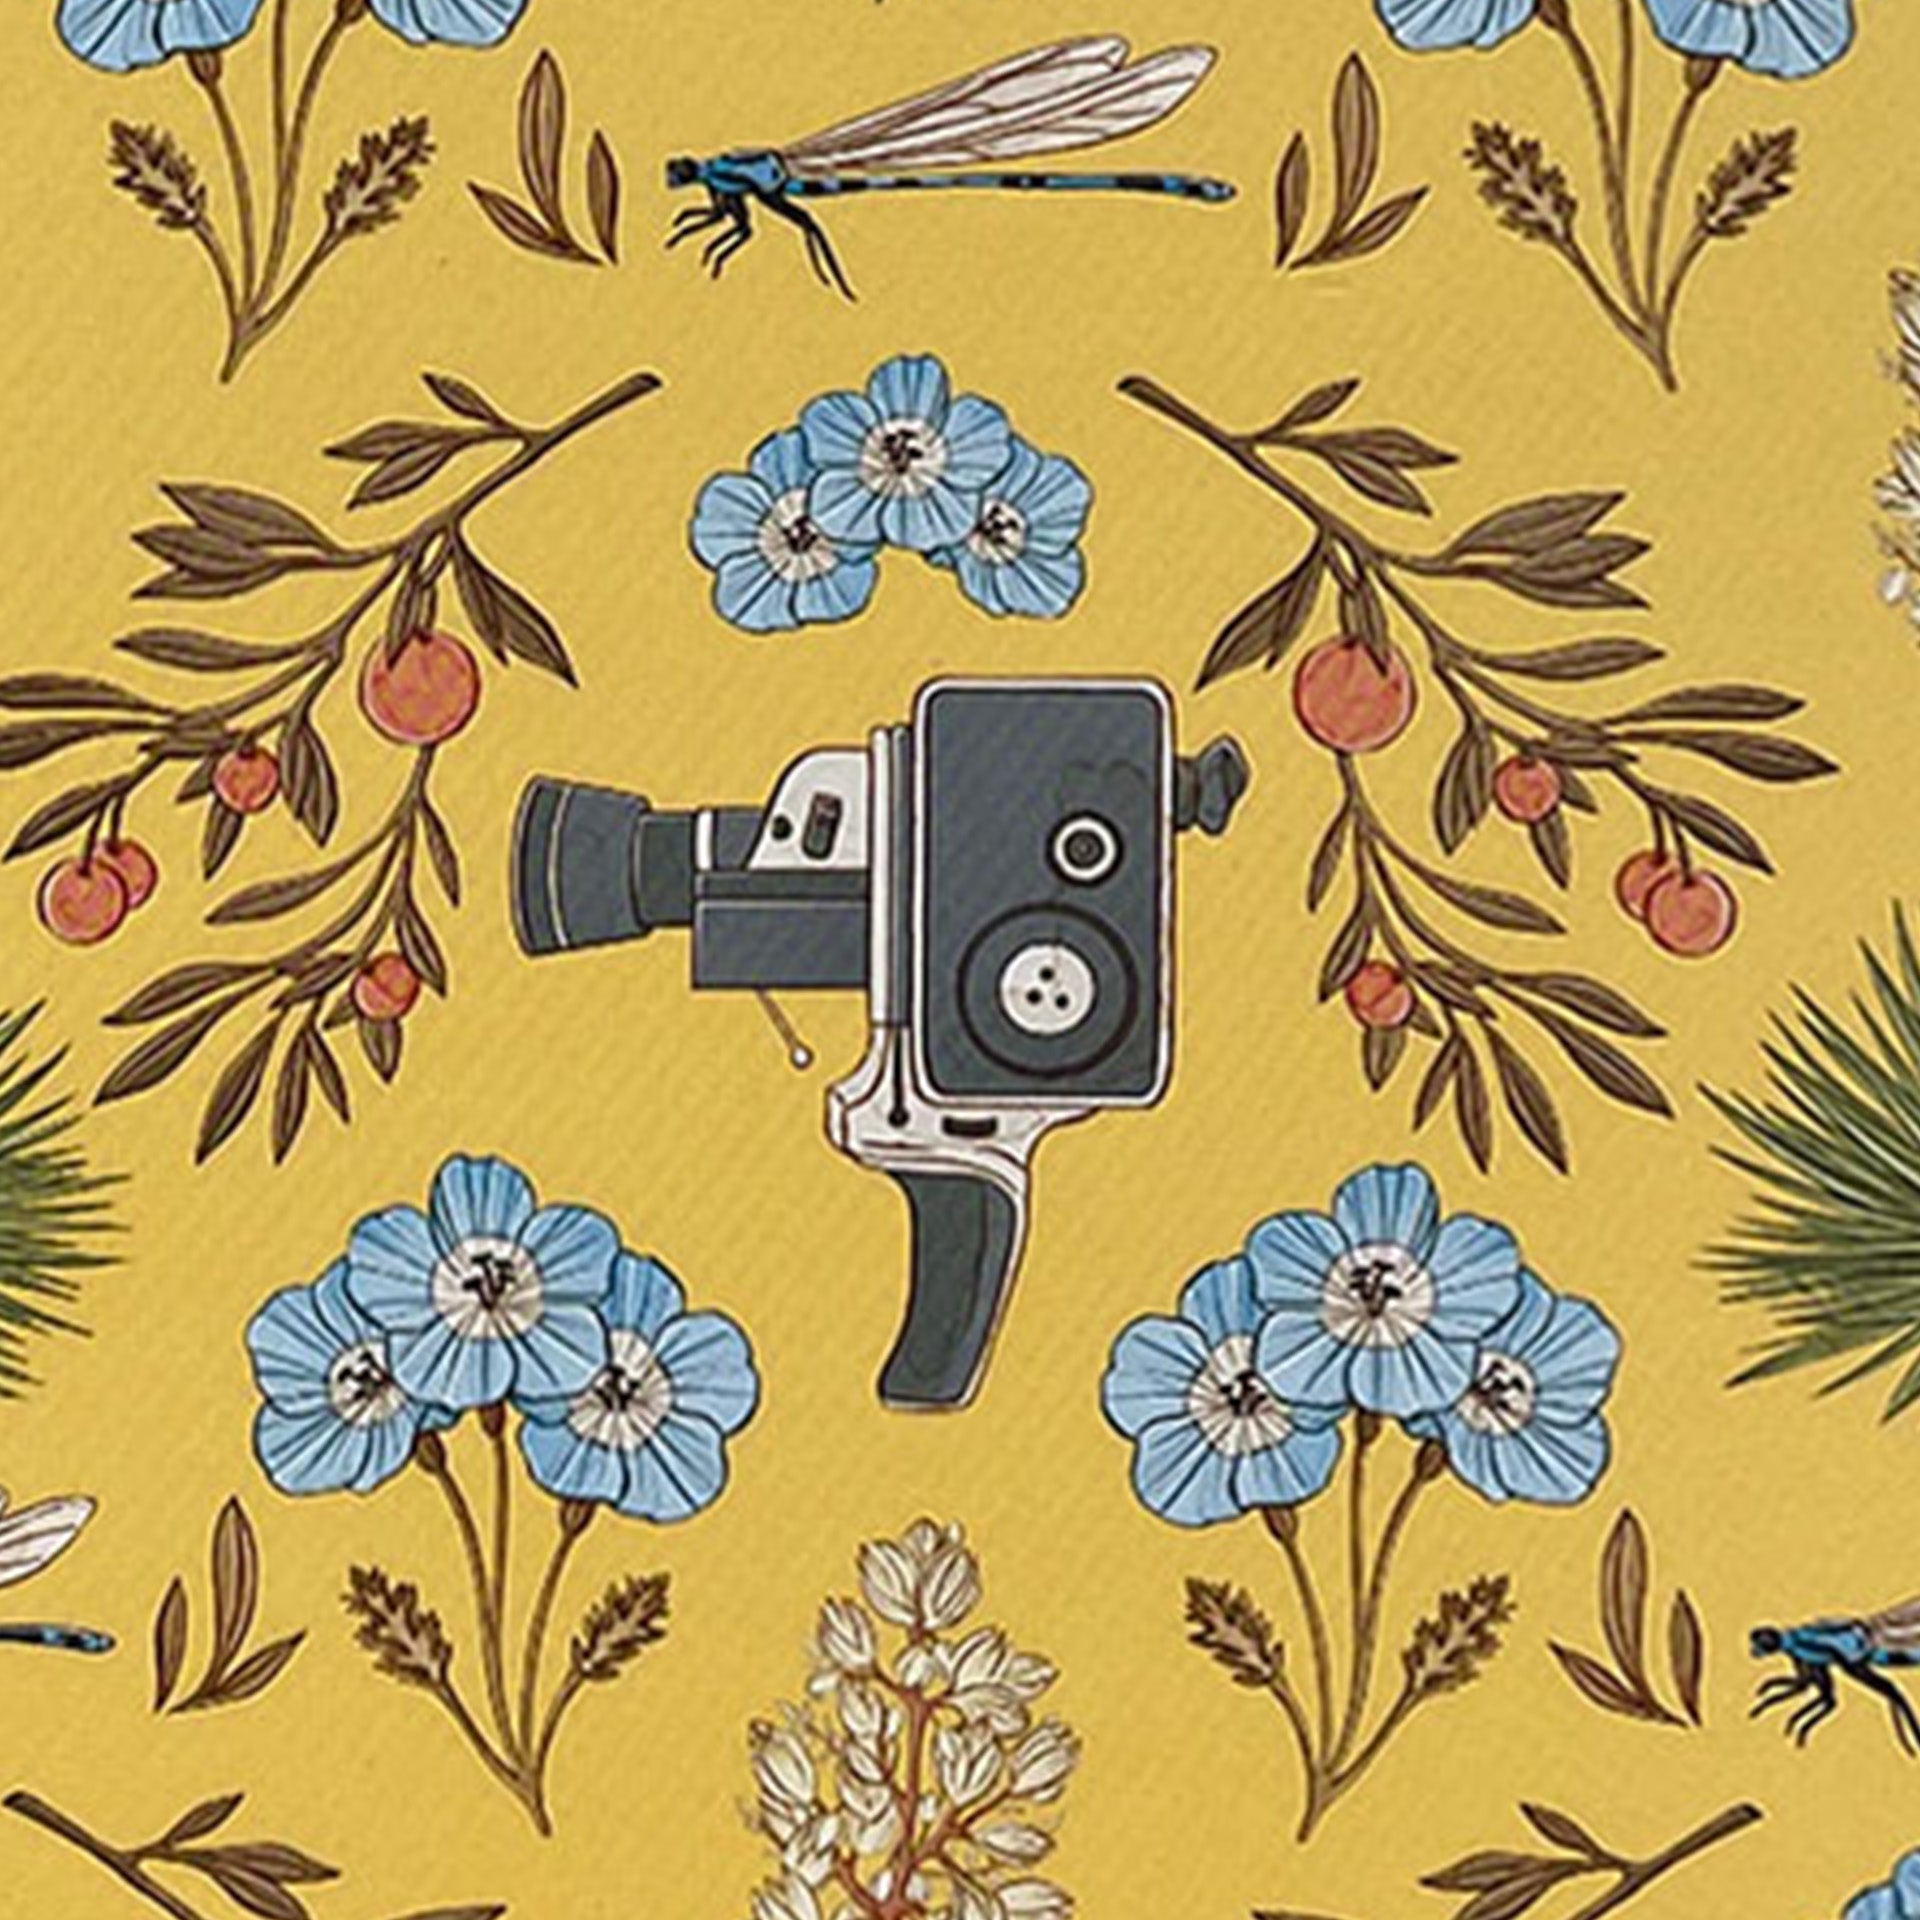 Closeup of with movie cameras, dragonflies and oranges printed on yellow